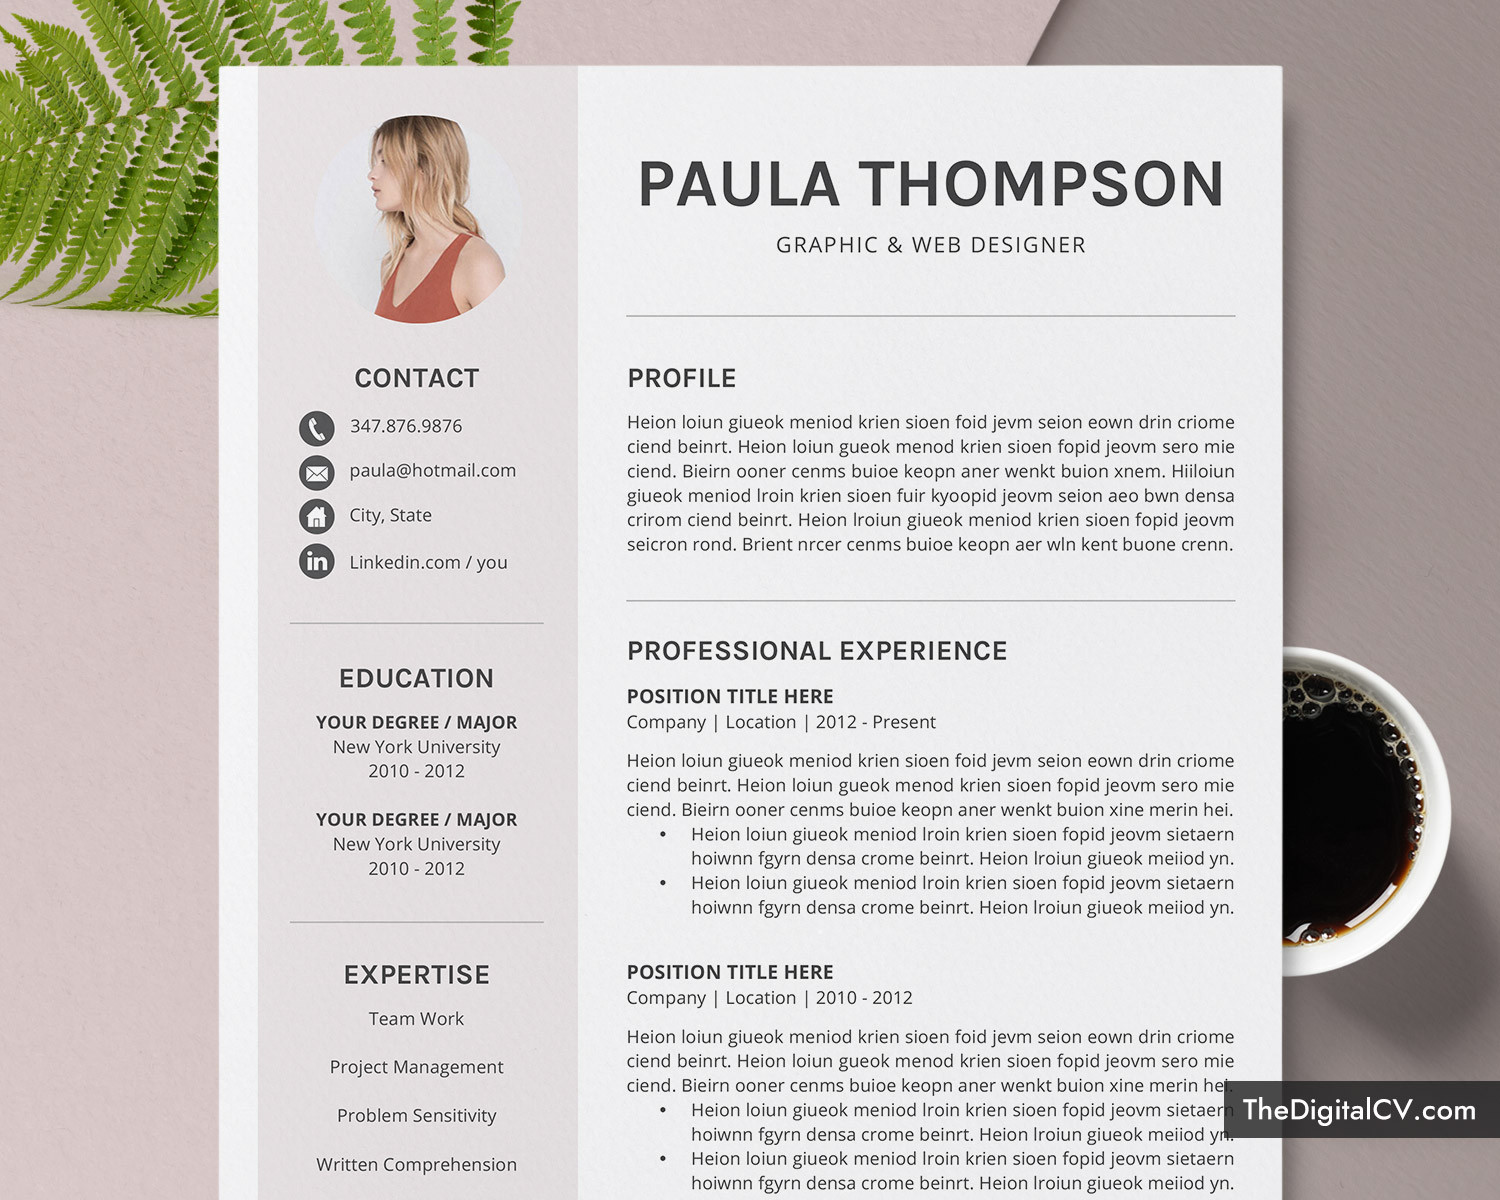 resume templates cv templates cover letter resume editing guide for students interns college graduates mea graduates experienced professionals and career changers paula resume